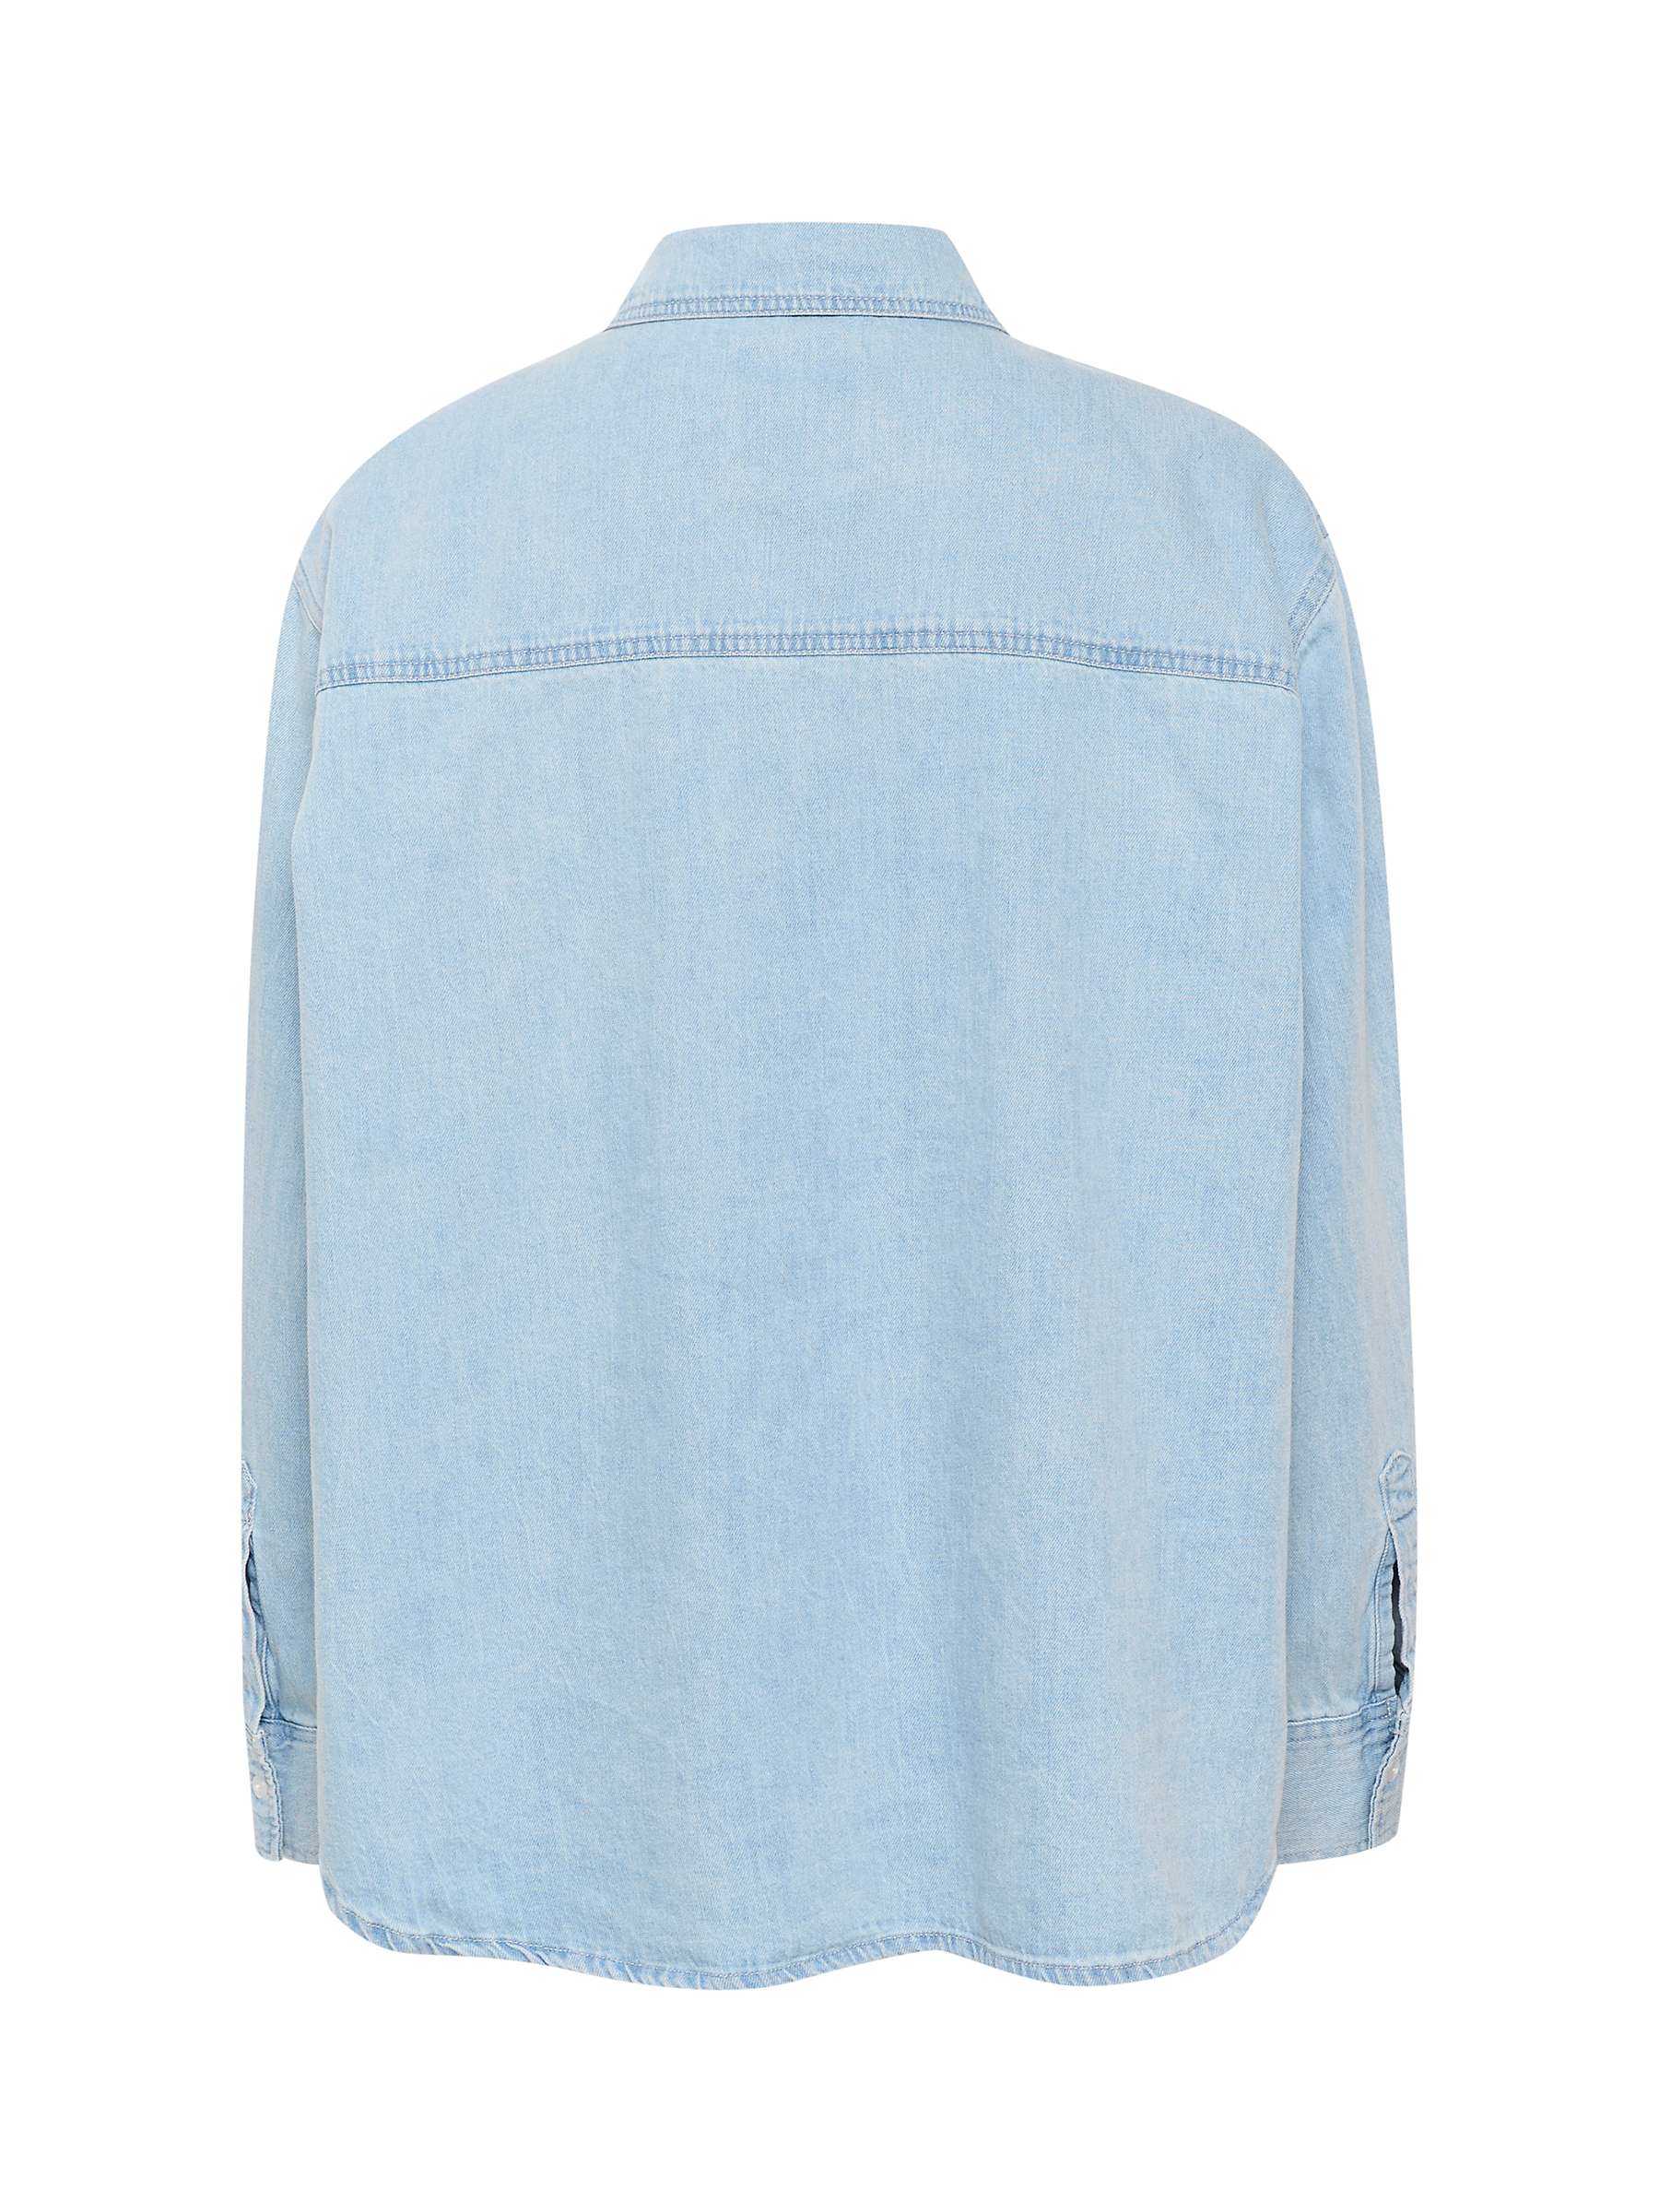 Buy Part Two Collette Long Sleeve Denim Shirt, Whiteish Blue Online at johnlewis.com